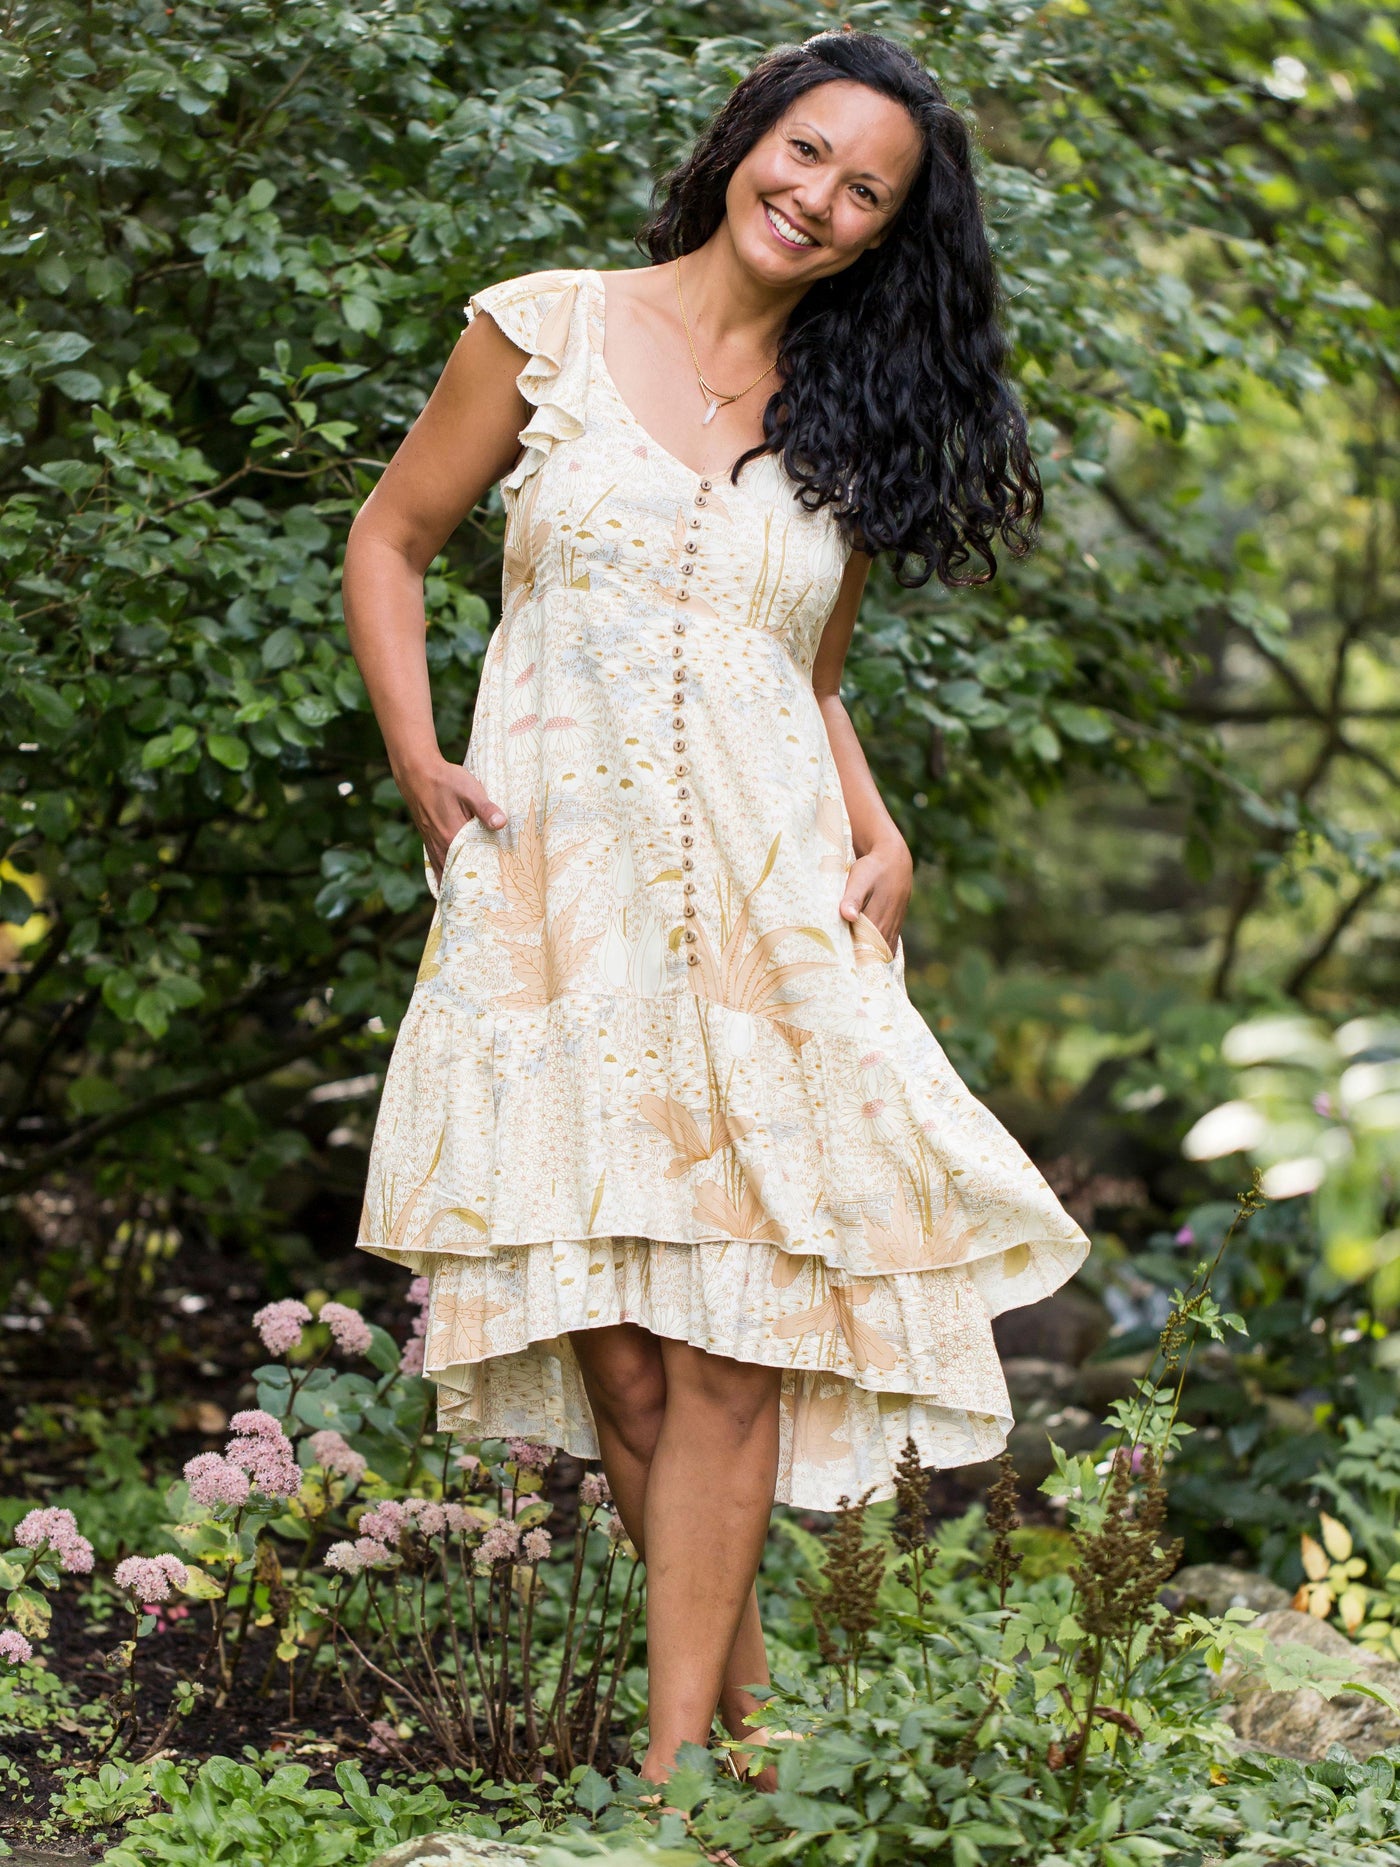 Victorian Inspired Garden Dress in Ecru | April Cornell - SOLD OUT